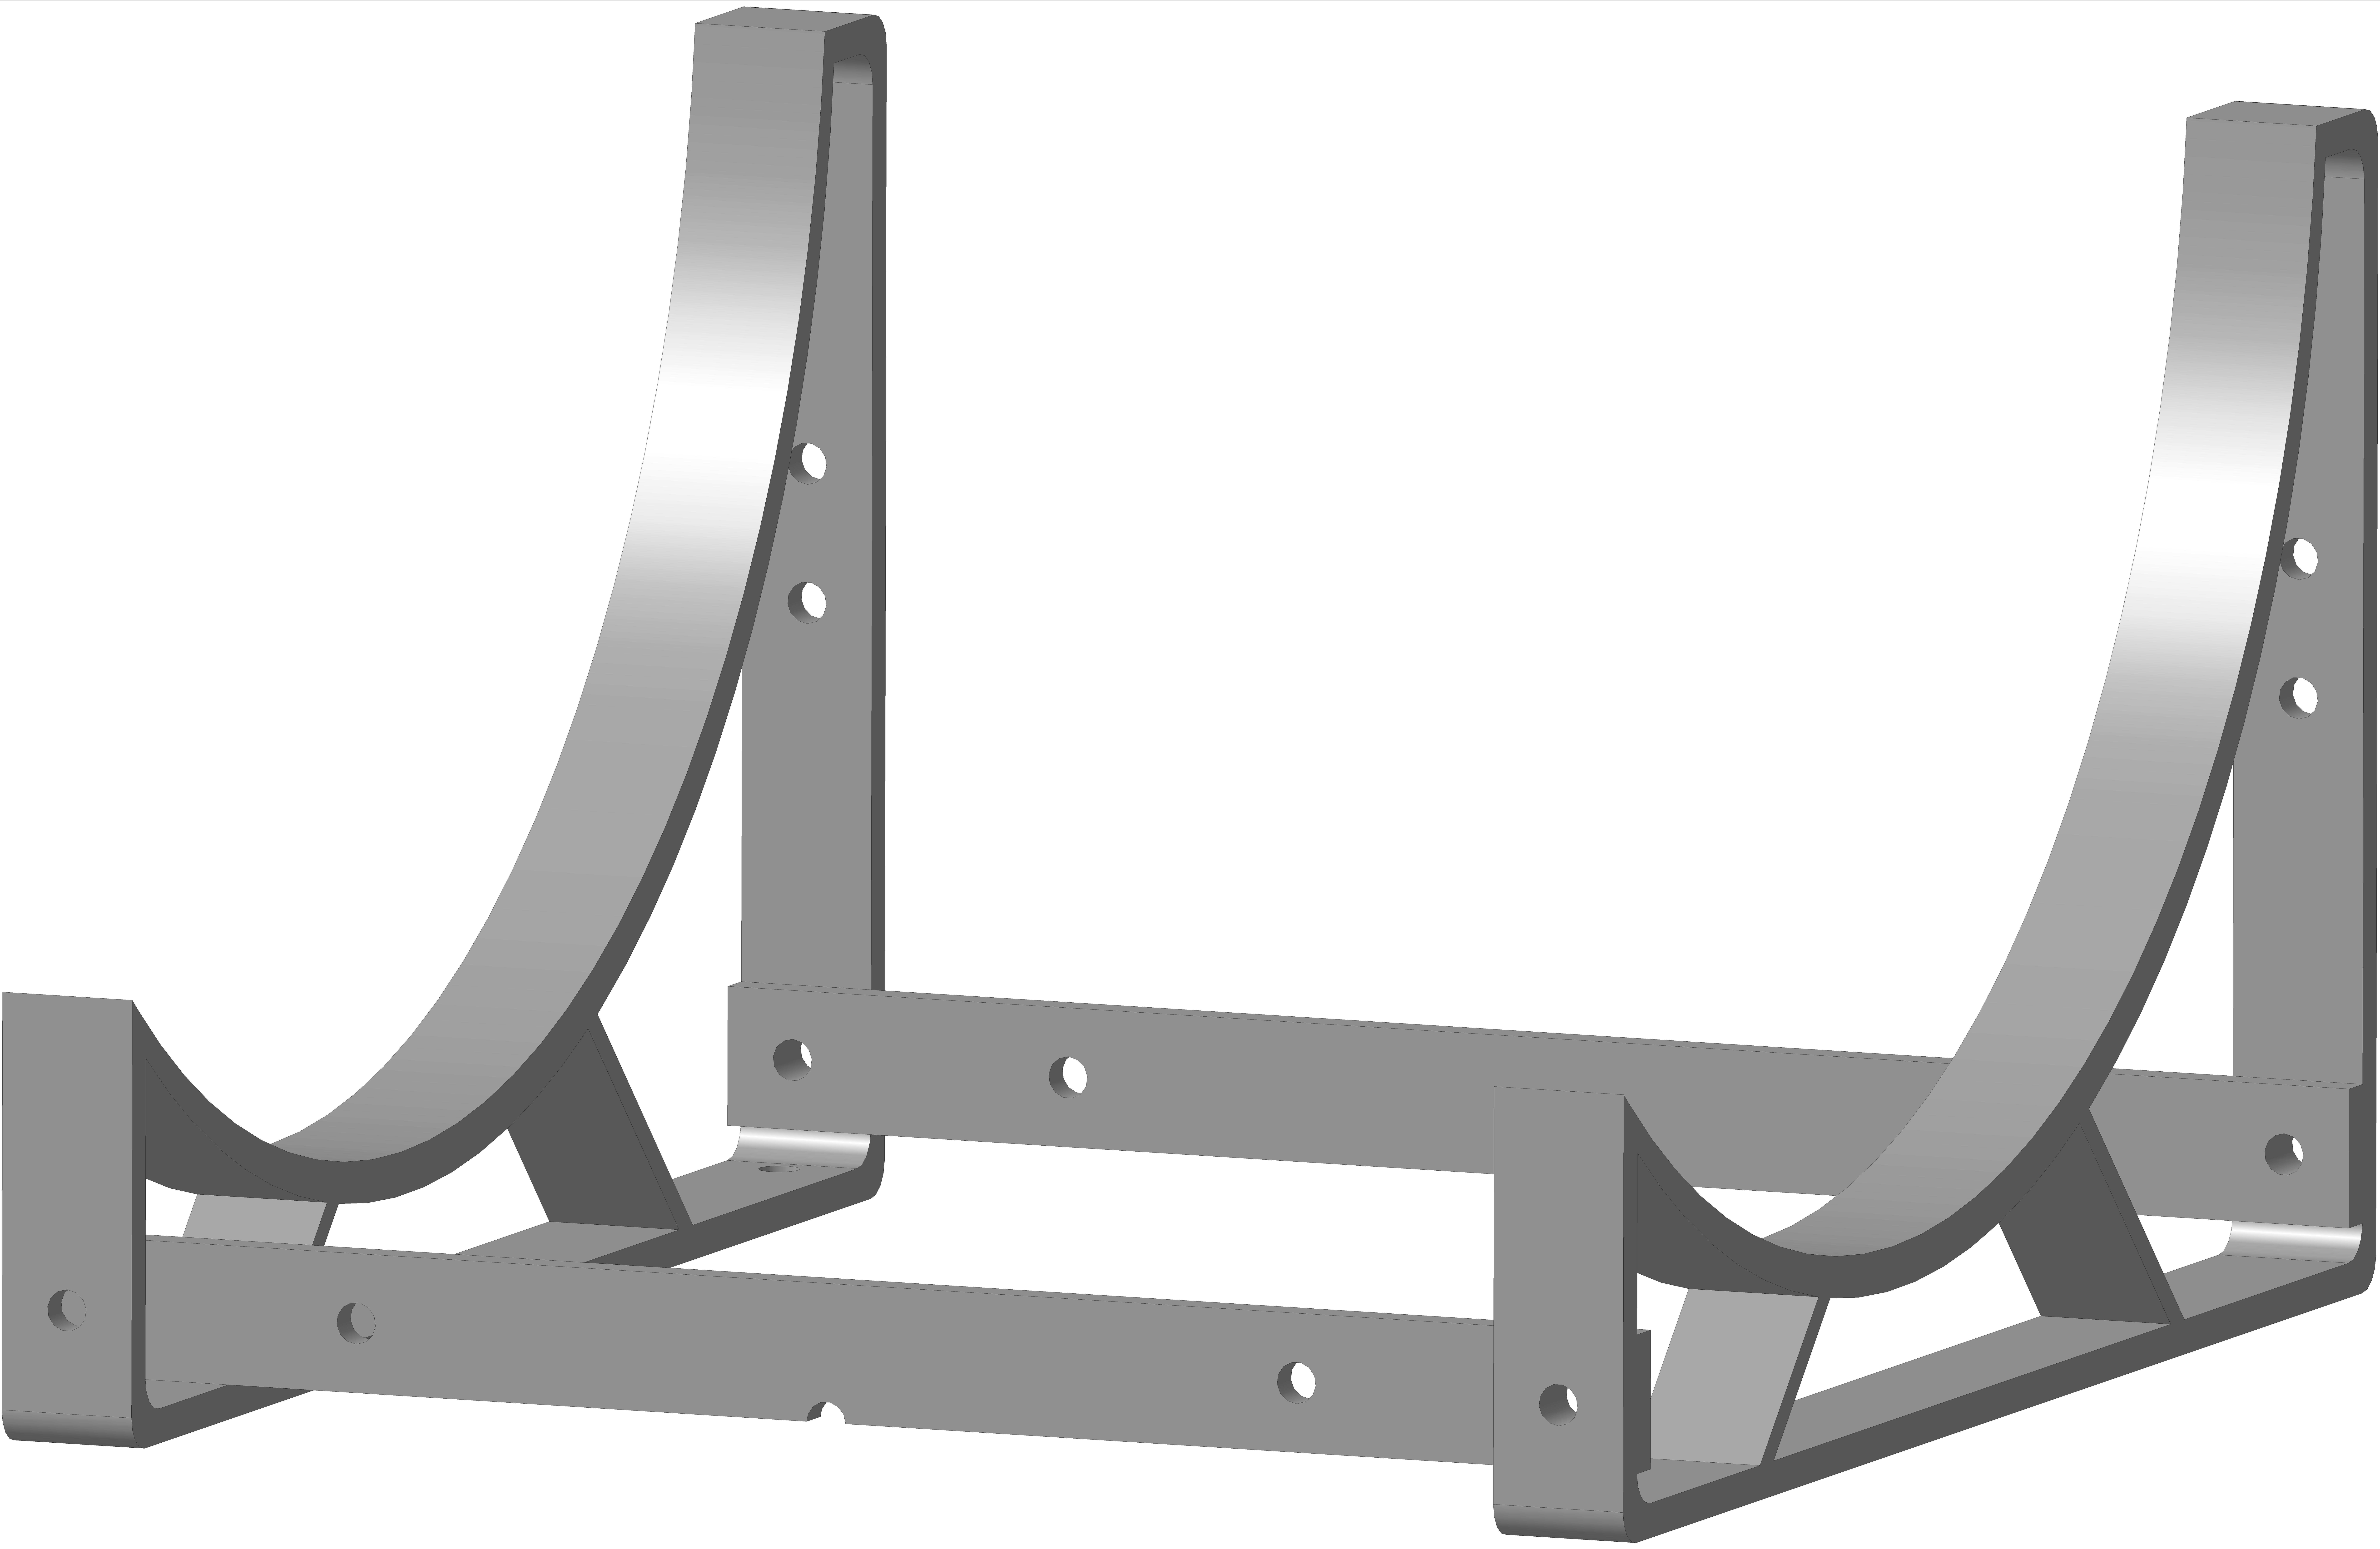 Galvanized deck cradle for 10-16DK drawing